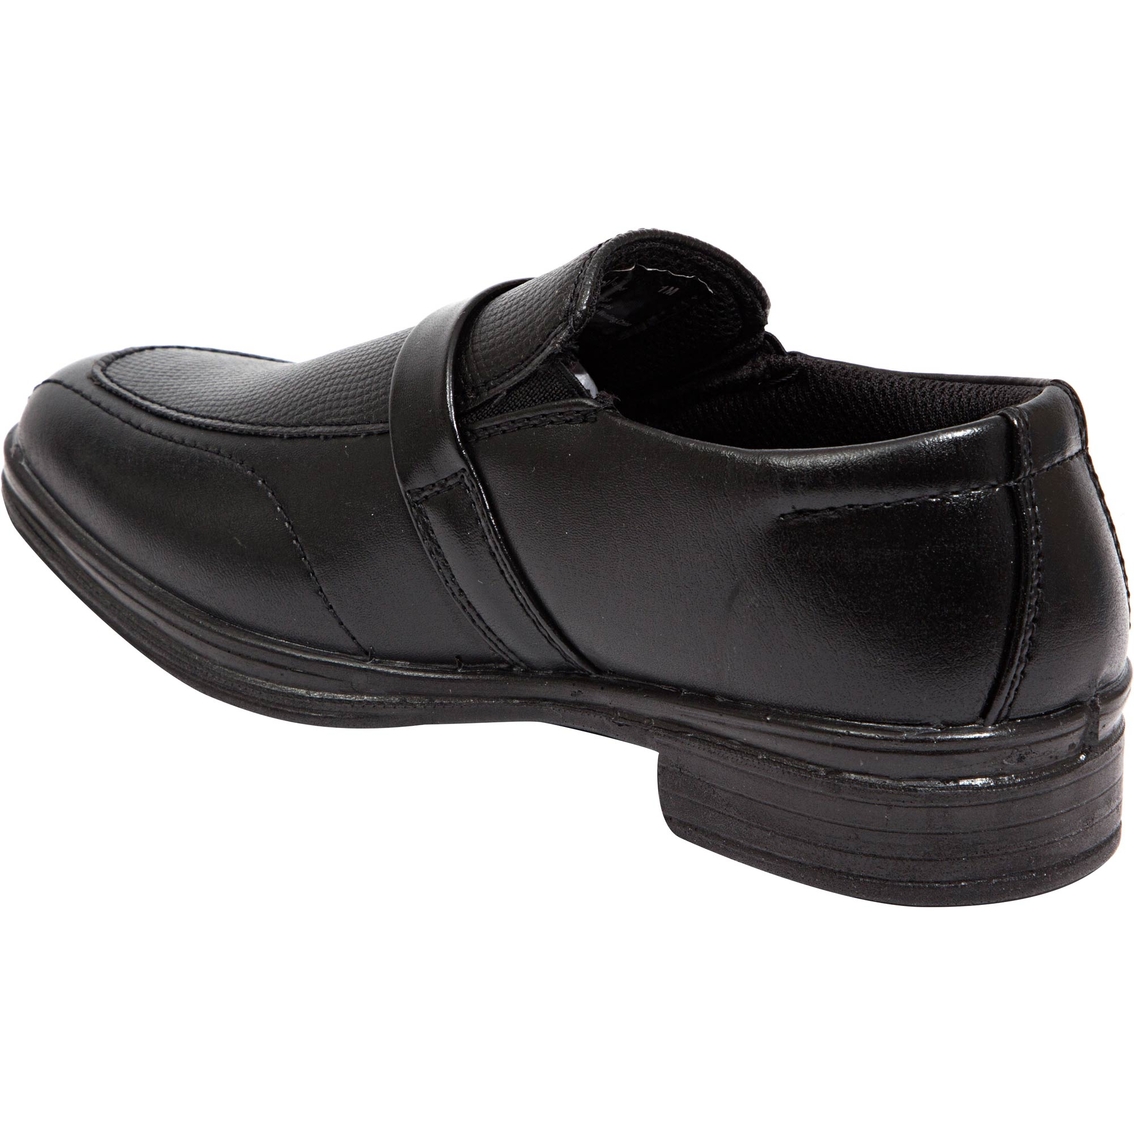 Deer Stags Boys Bold Dress Slip On Shoes - Image 4 of 6